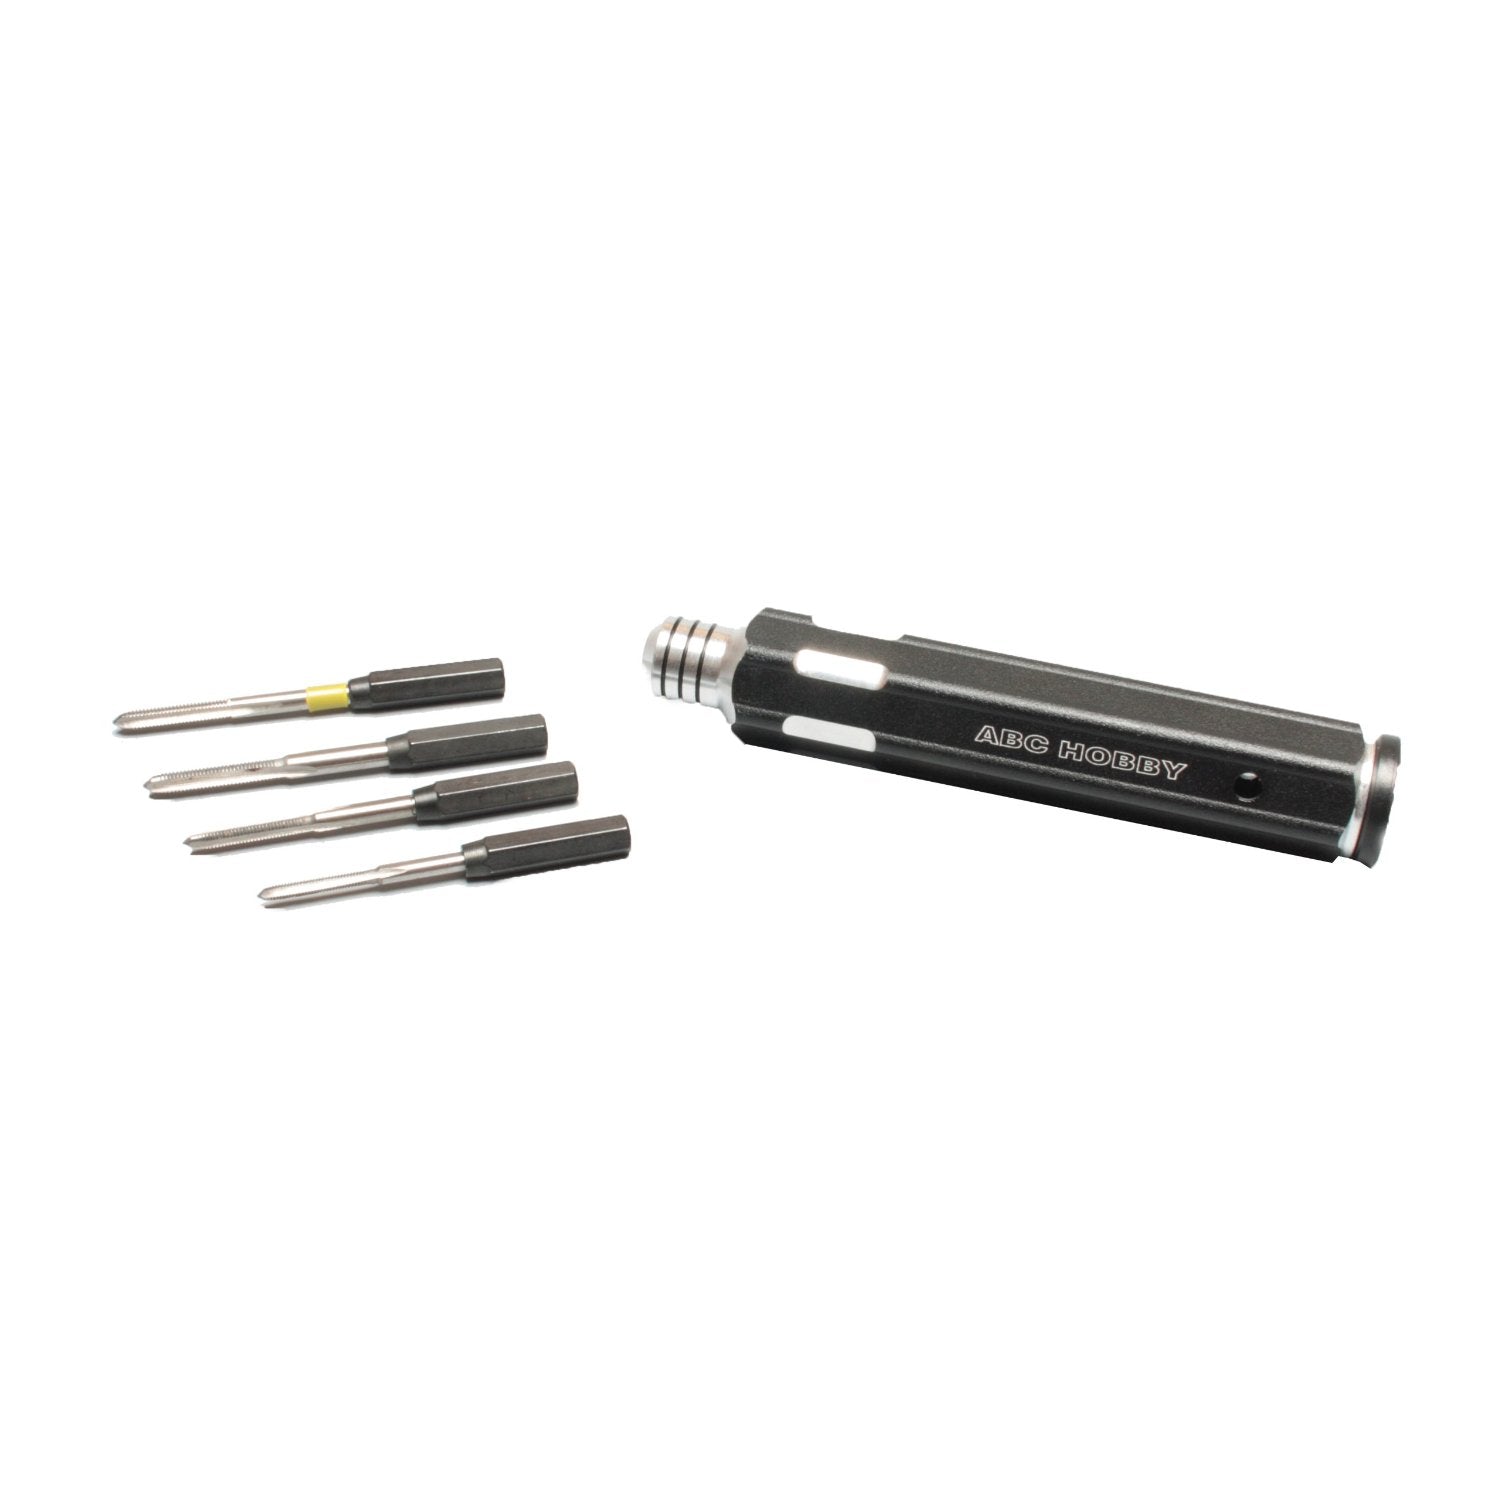 16875 Tapping Tool Set in 1 (2.0mm, 2.6mm, 3.0mm, 3.0mm Reverse)